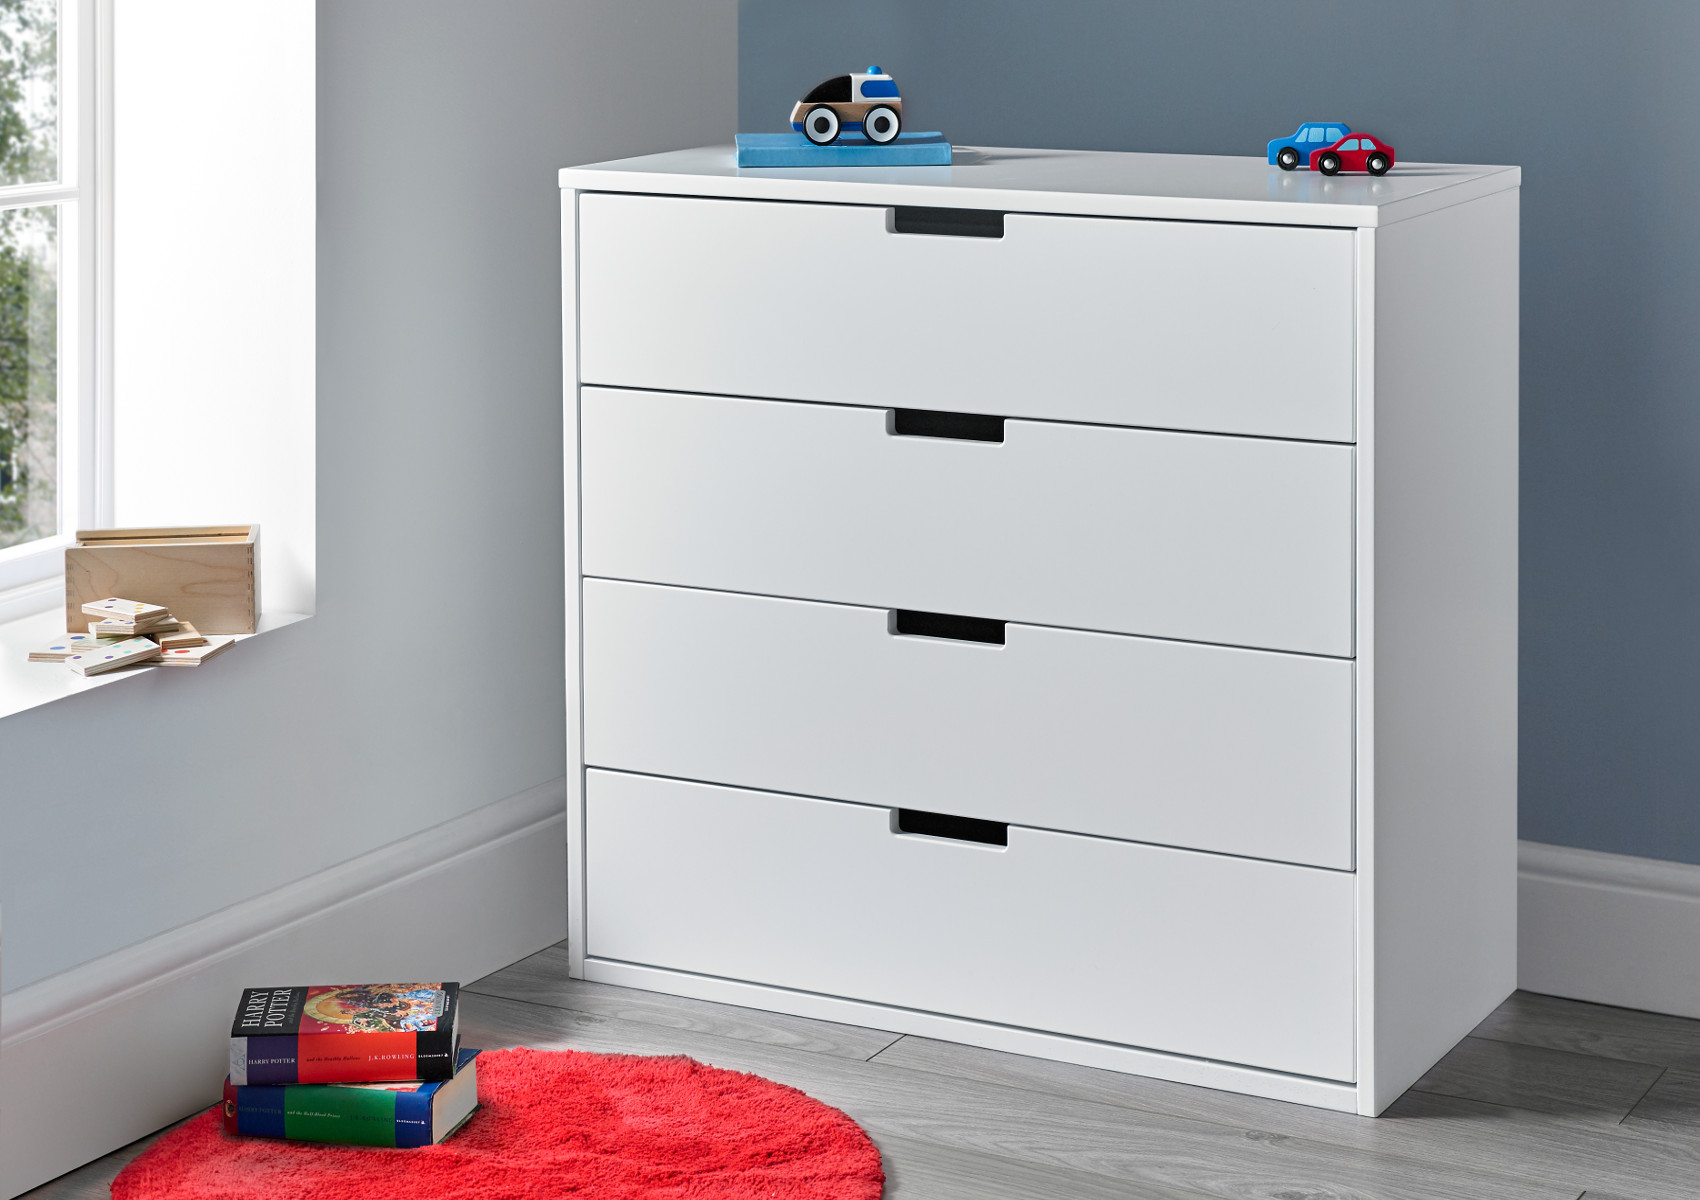 View MontanaModena 4 Drawer Chest Time4Sleep information